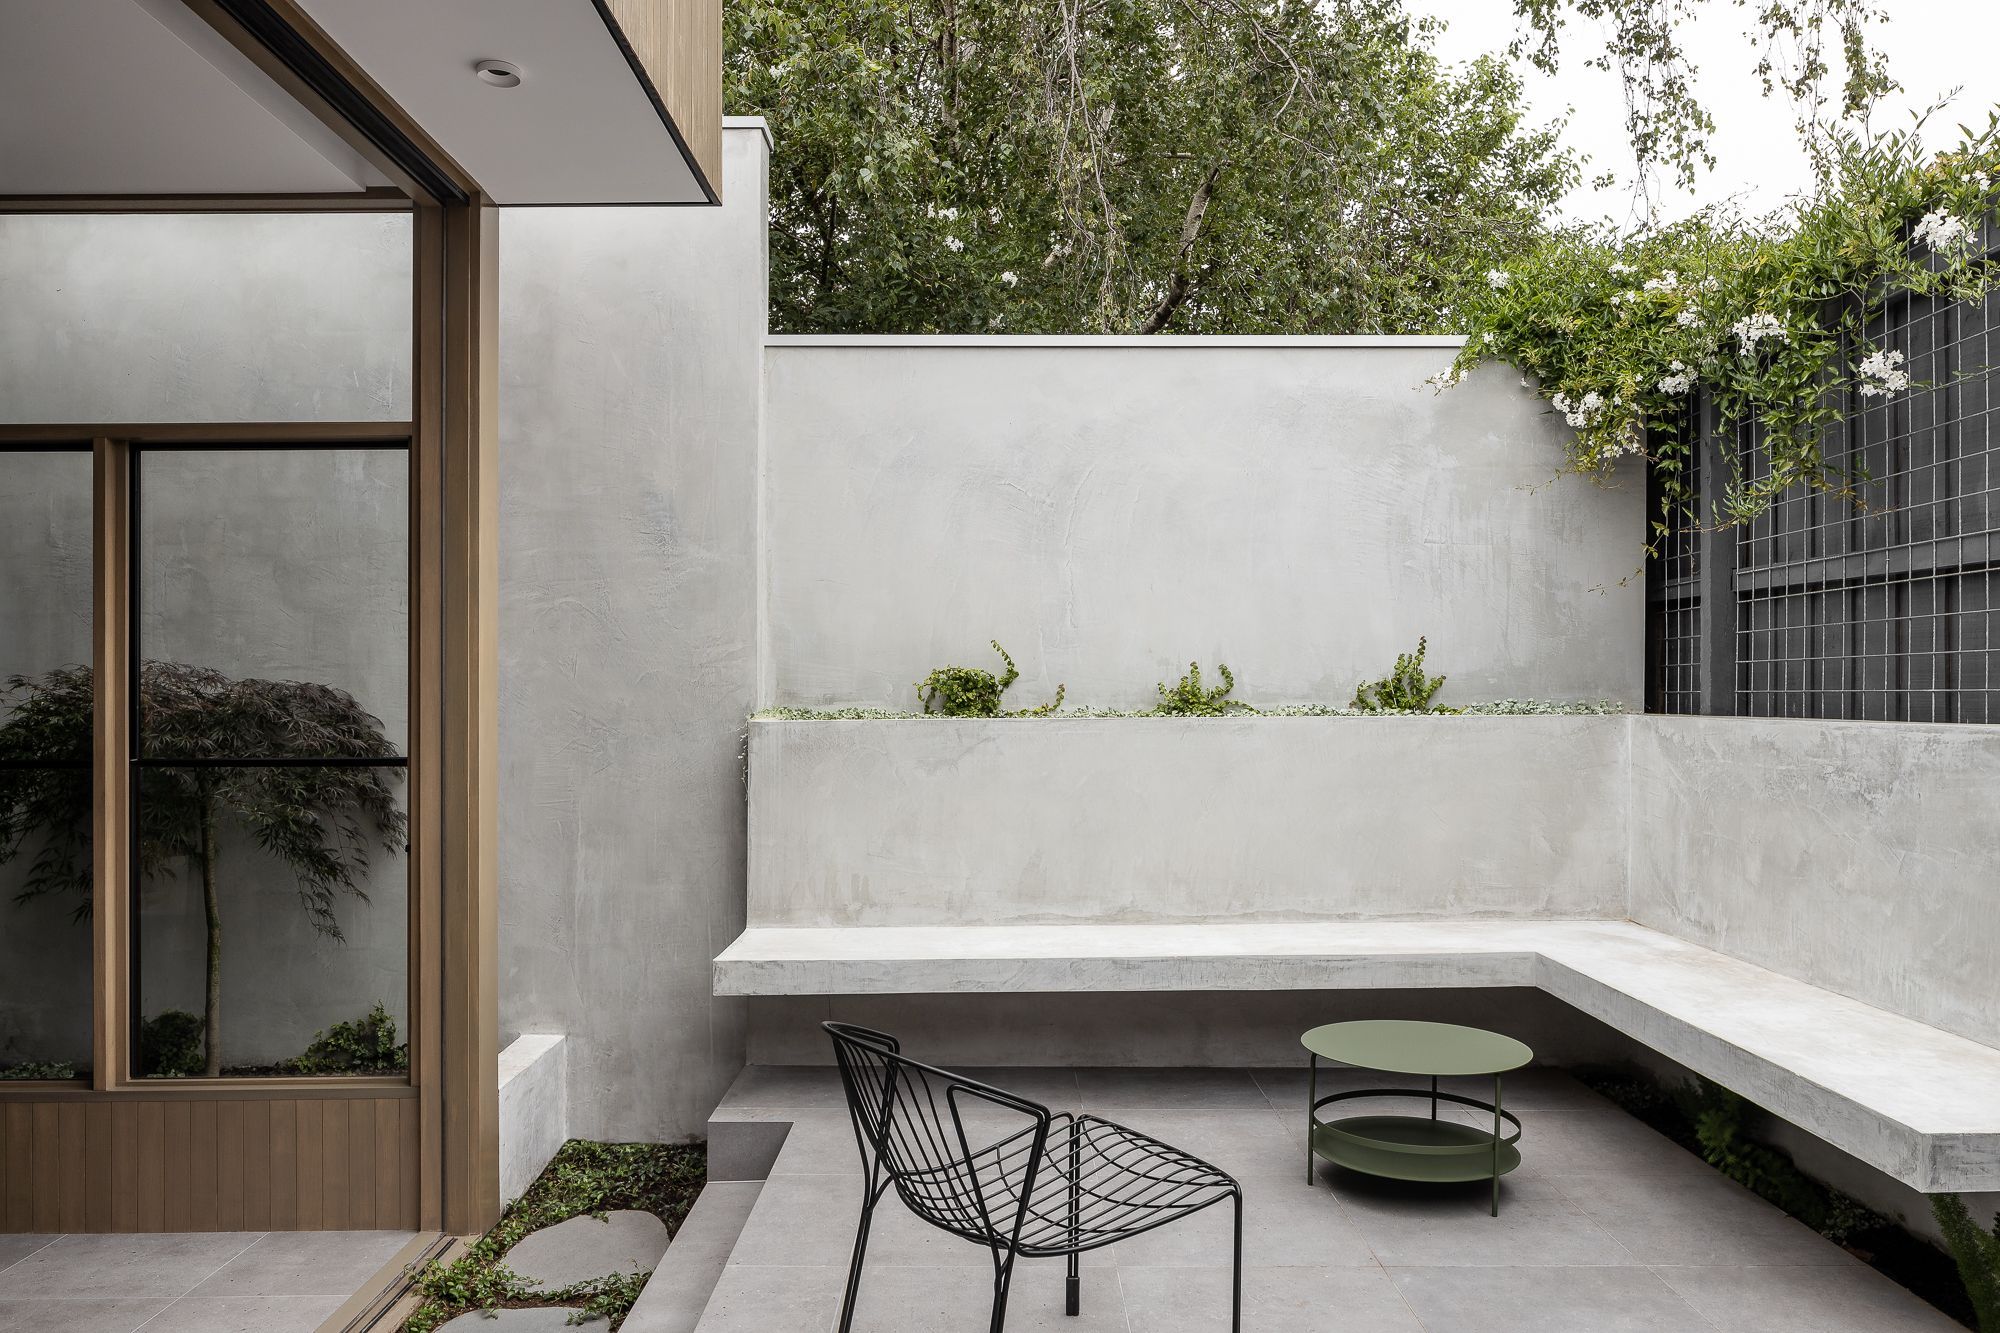 Ripponlea House by Luke Fry Architecture and Interior Design. View of Internal courtyard, highlighting connection to outdoor 